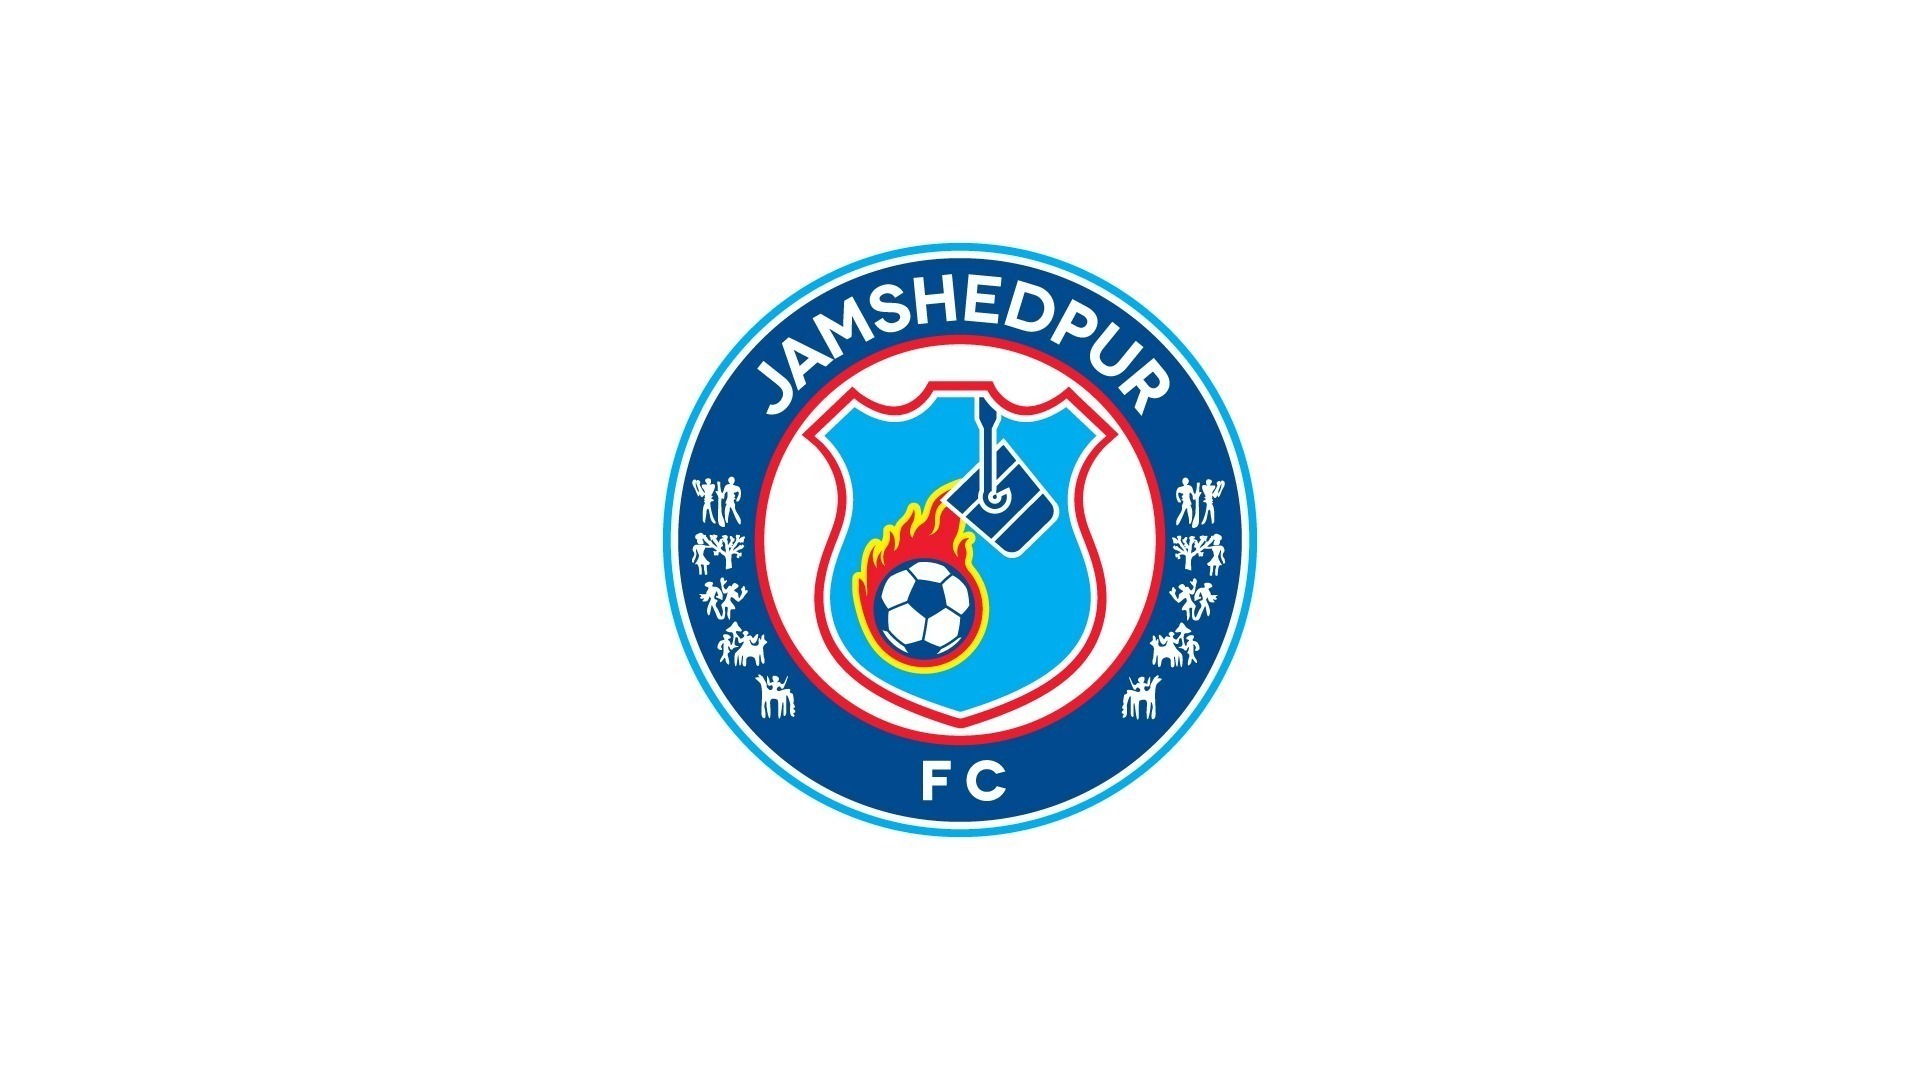 Tata Match Predictor Contest Terms & Conditions - Jamshedpur Football Club